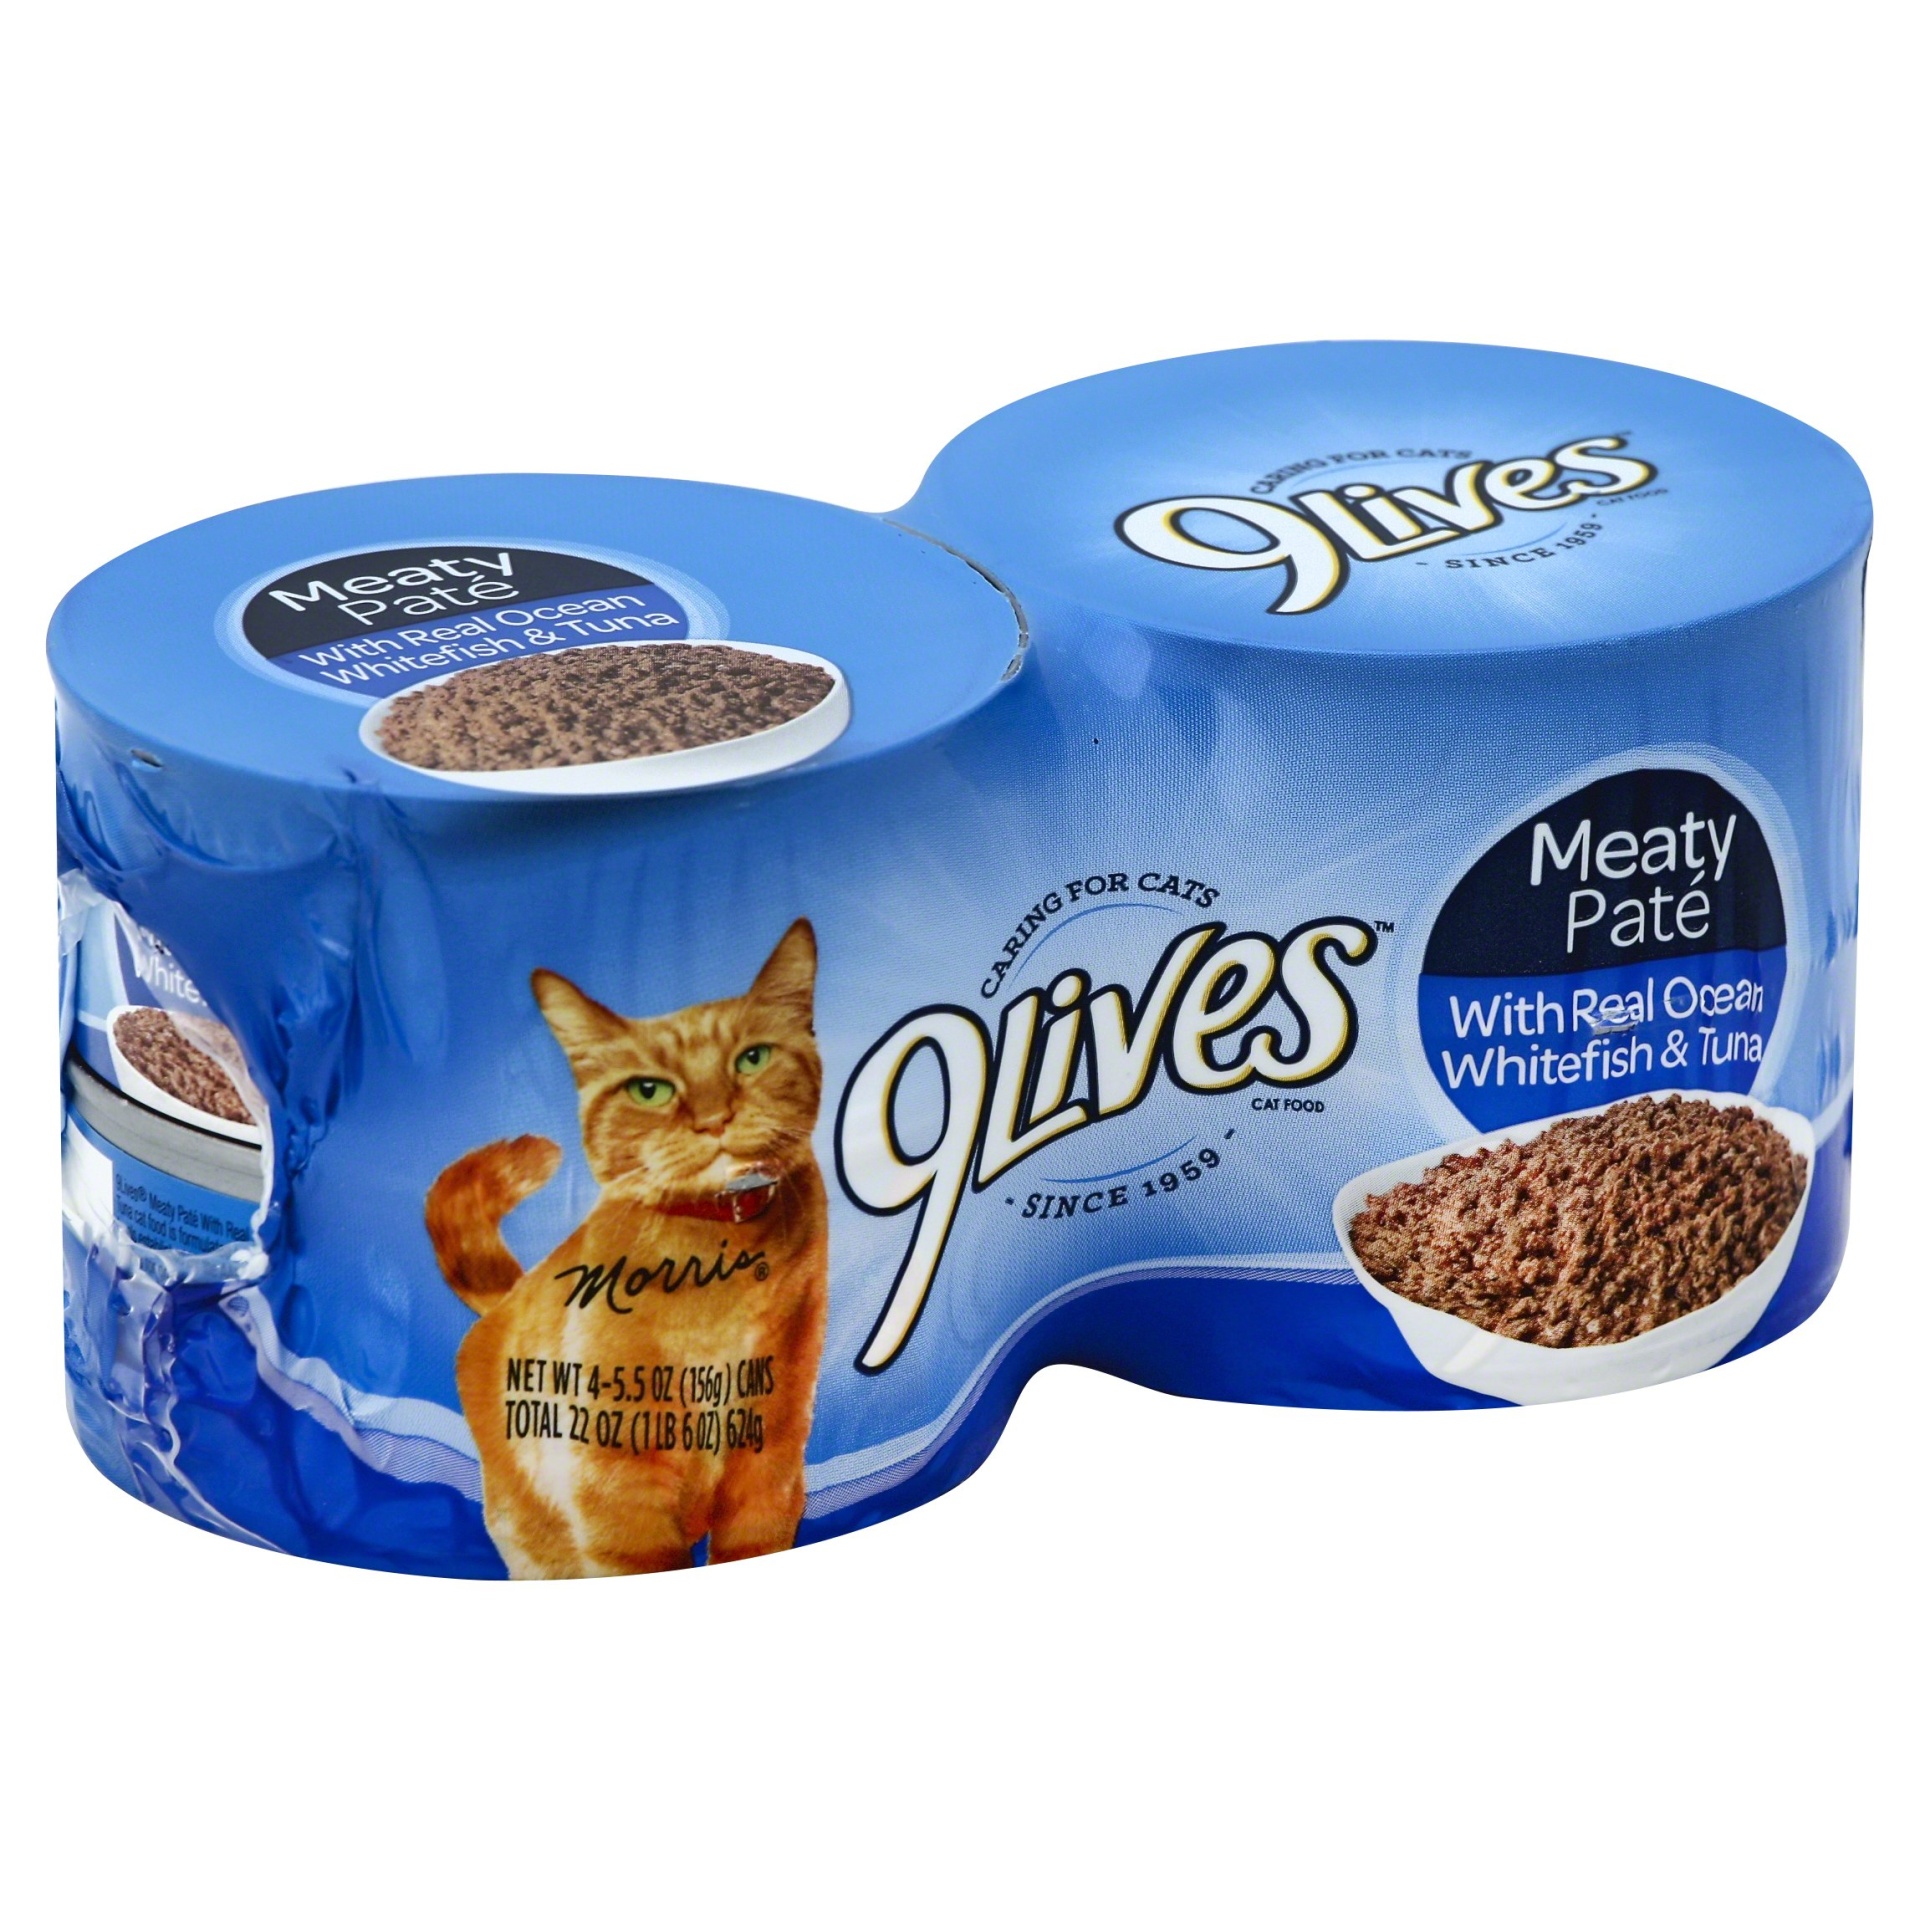 slide 1 of 5, 9Lives Cat Food with Real Ocean Whitefish & Tuna Meaty Pate, 4 ct; 22 oz